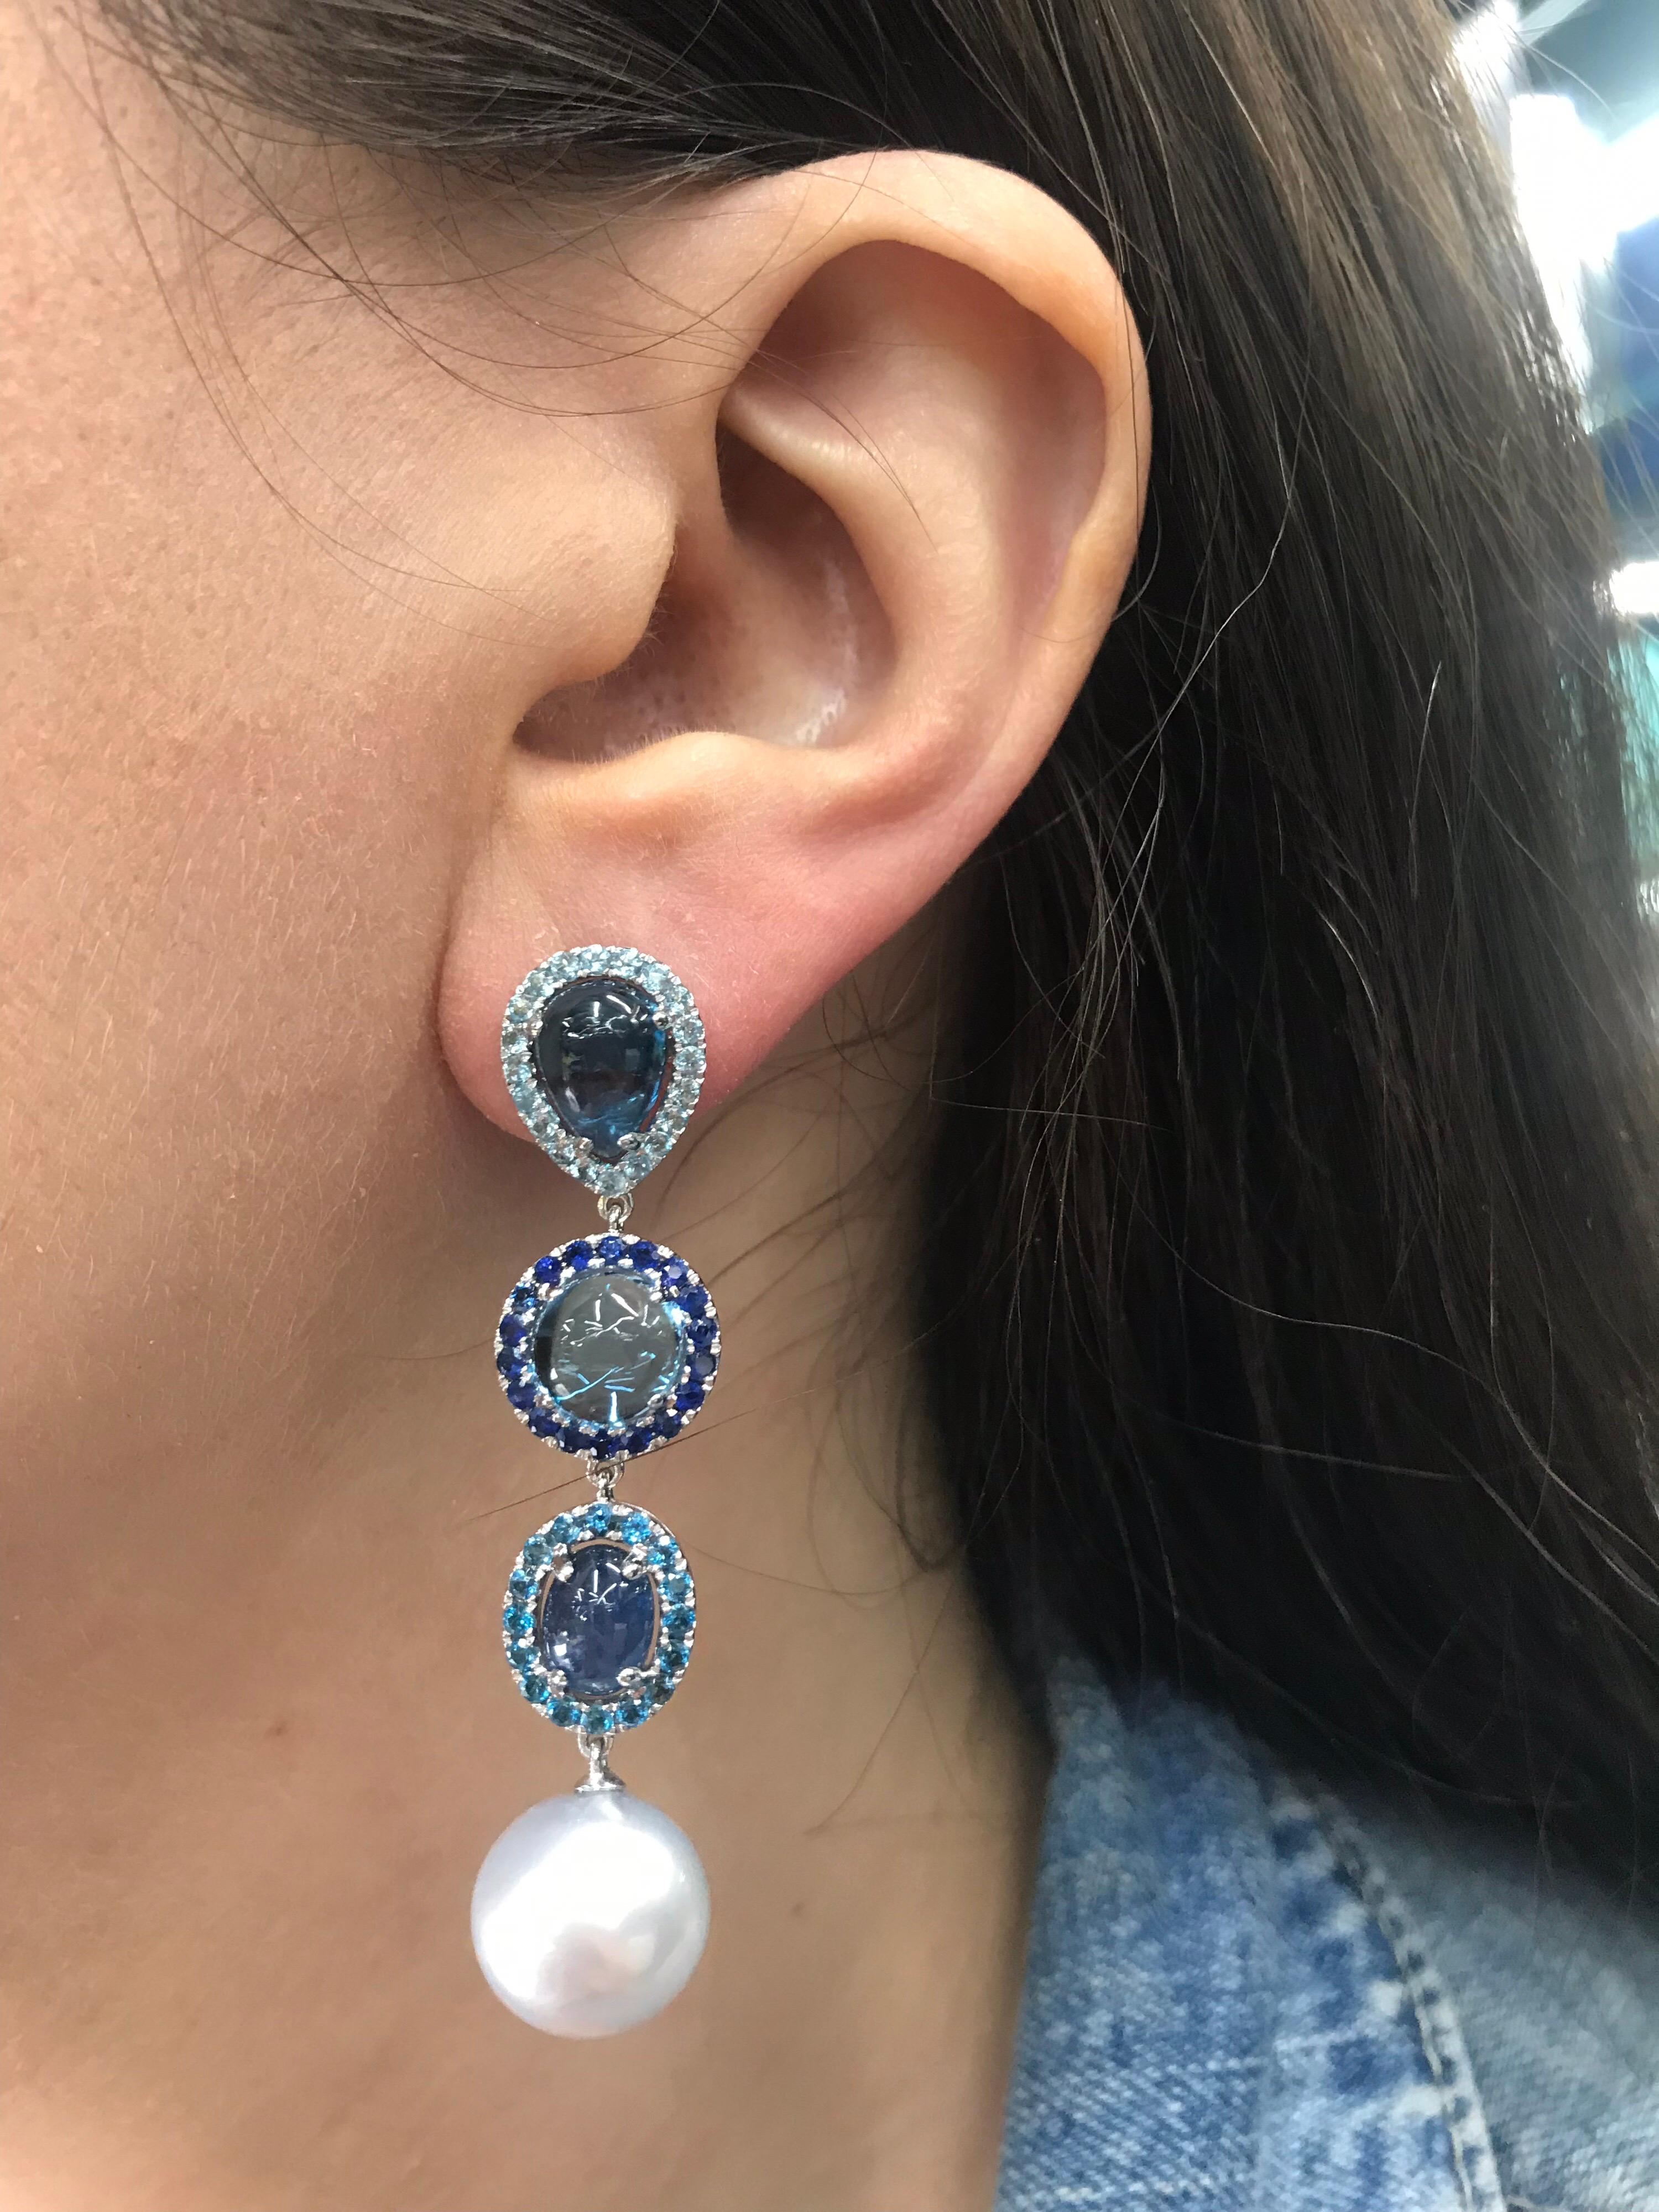 18K White gold drop earrings featuring alternating blue topaz, 12.50 carats, and sapphires 4.50 carats with two white South Sea Pearls measuring 12-13 mm. 